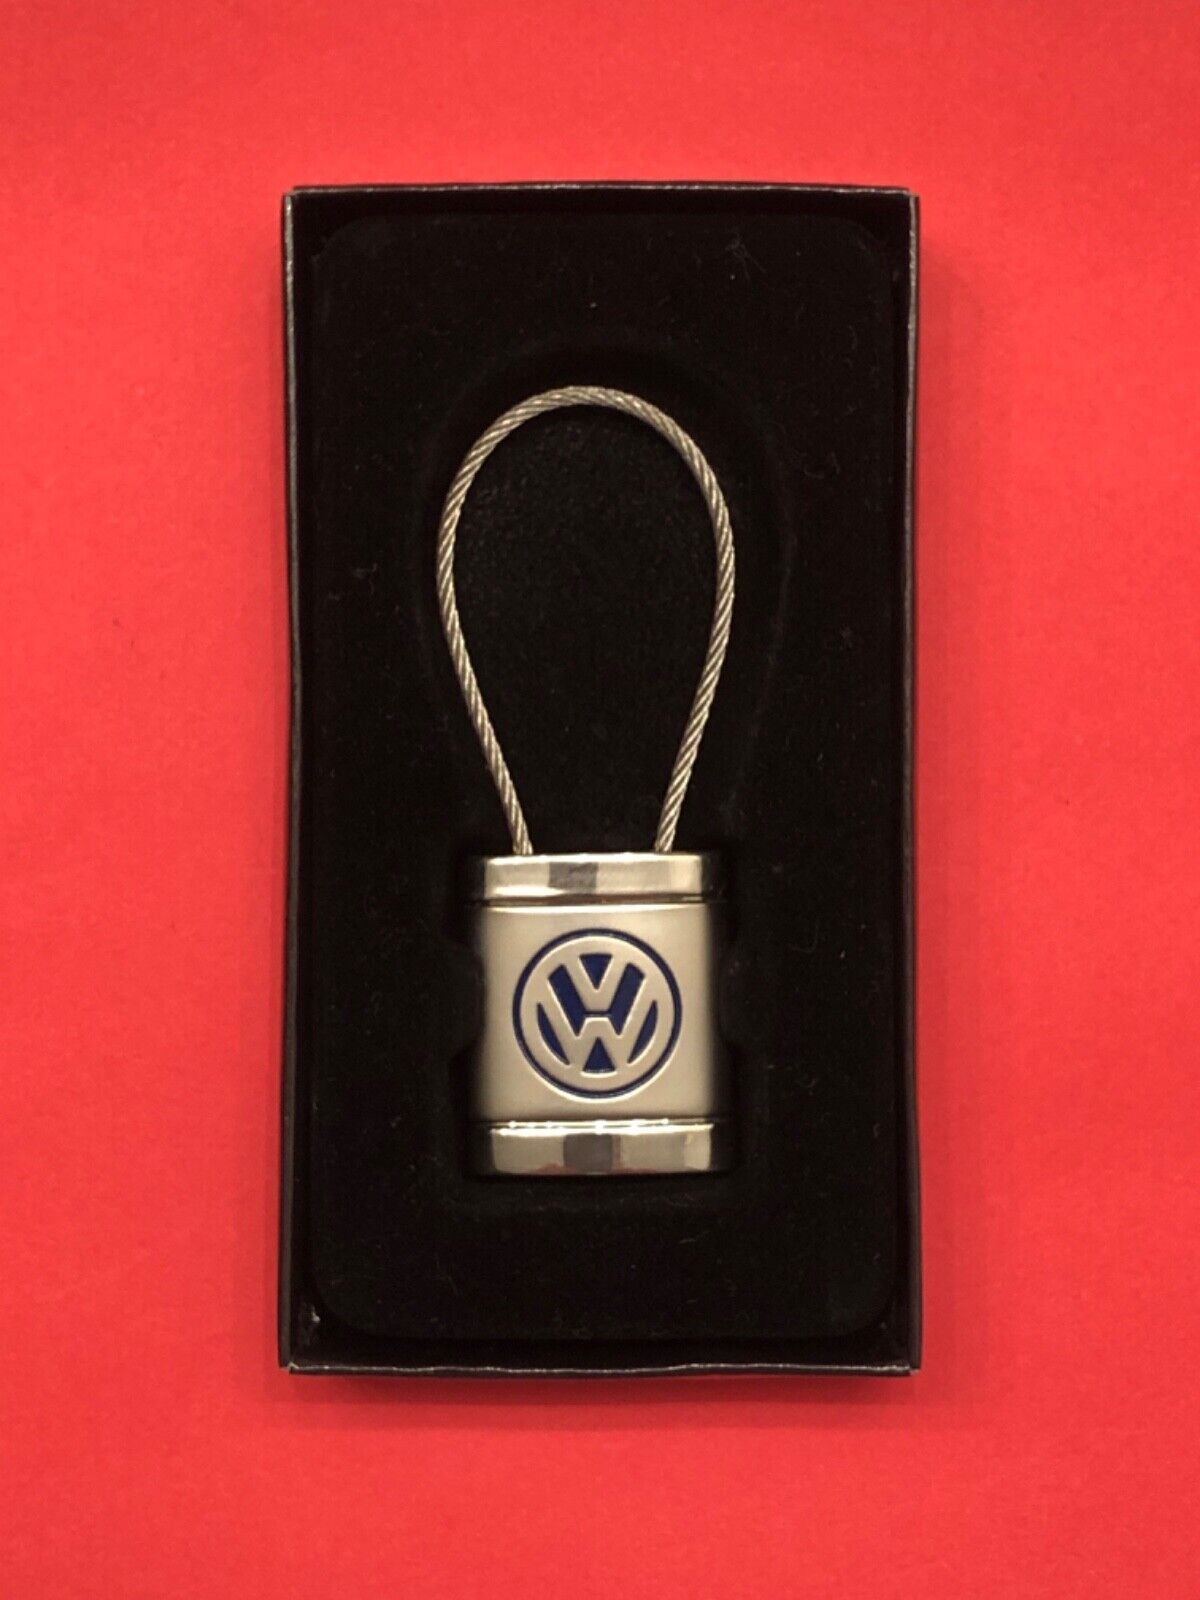 Wire Loop Keyring Keychain with VW Logo - With Box - Collectible - Memorabilia